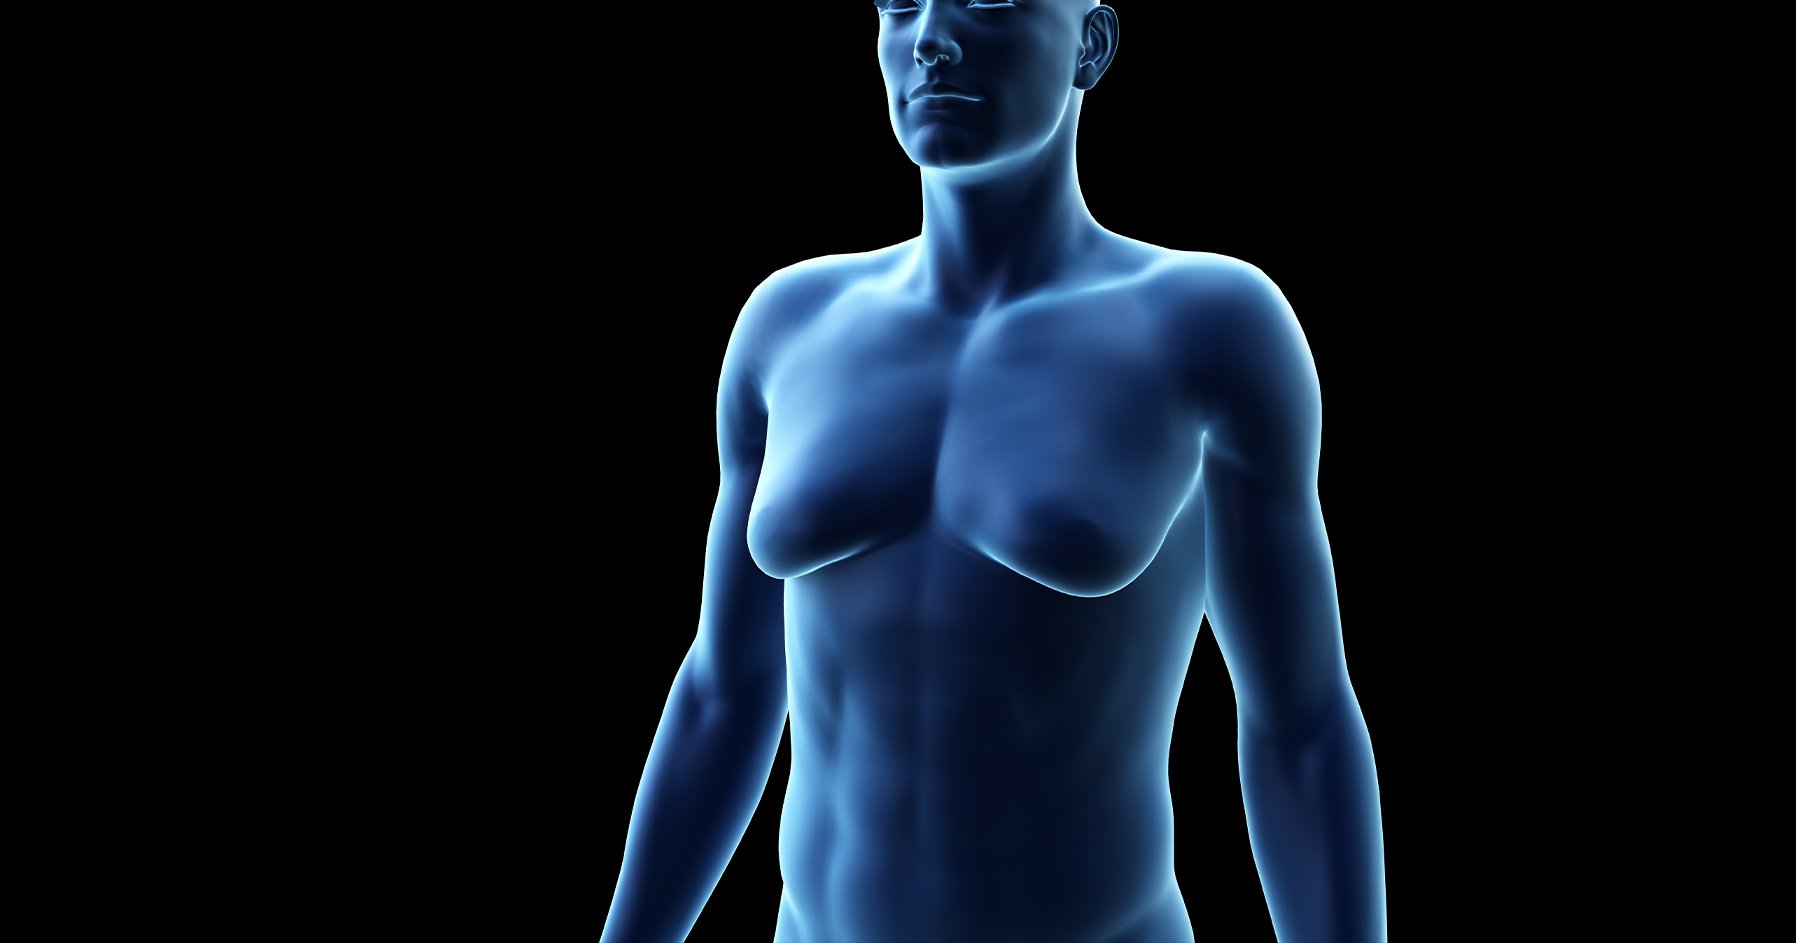 Image of the effects of gynecomastia on male body.